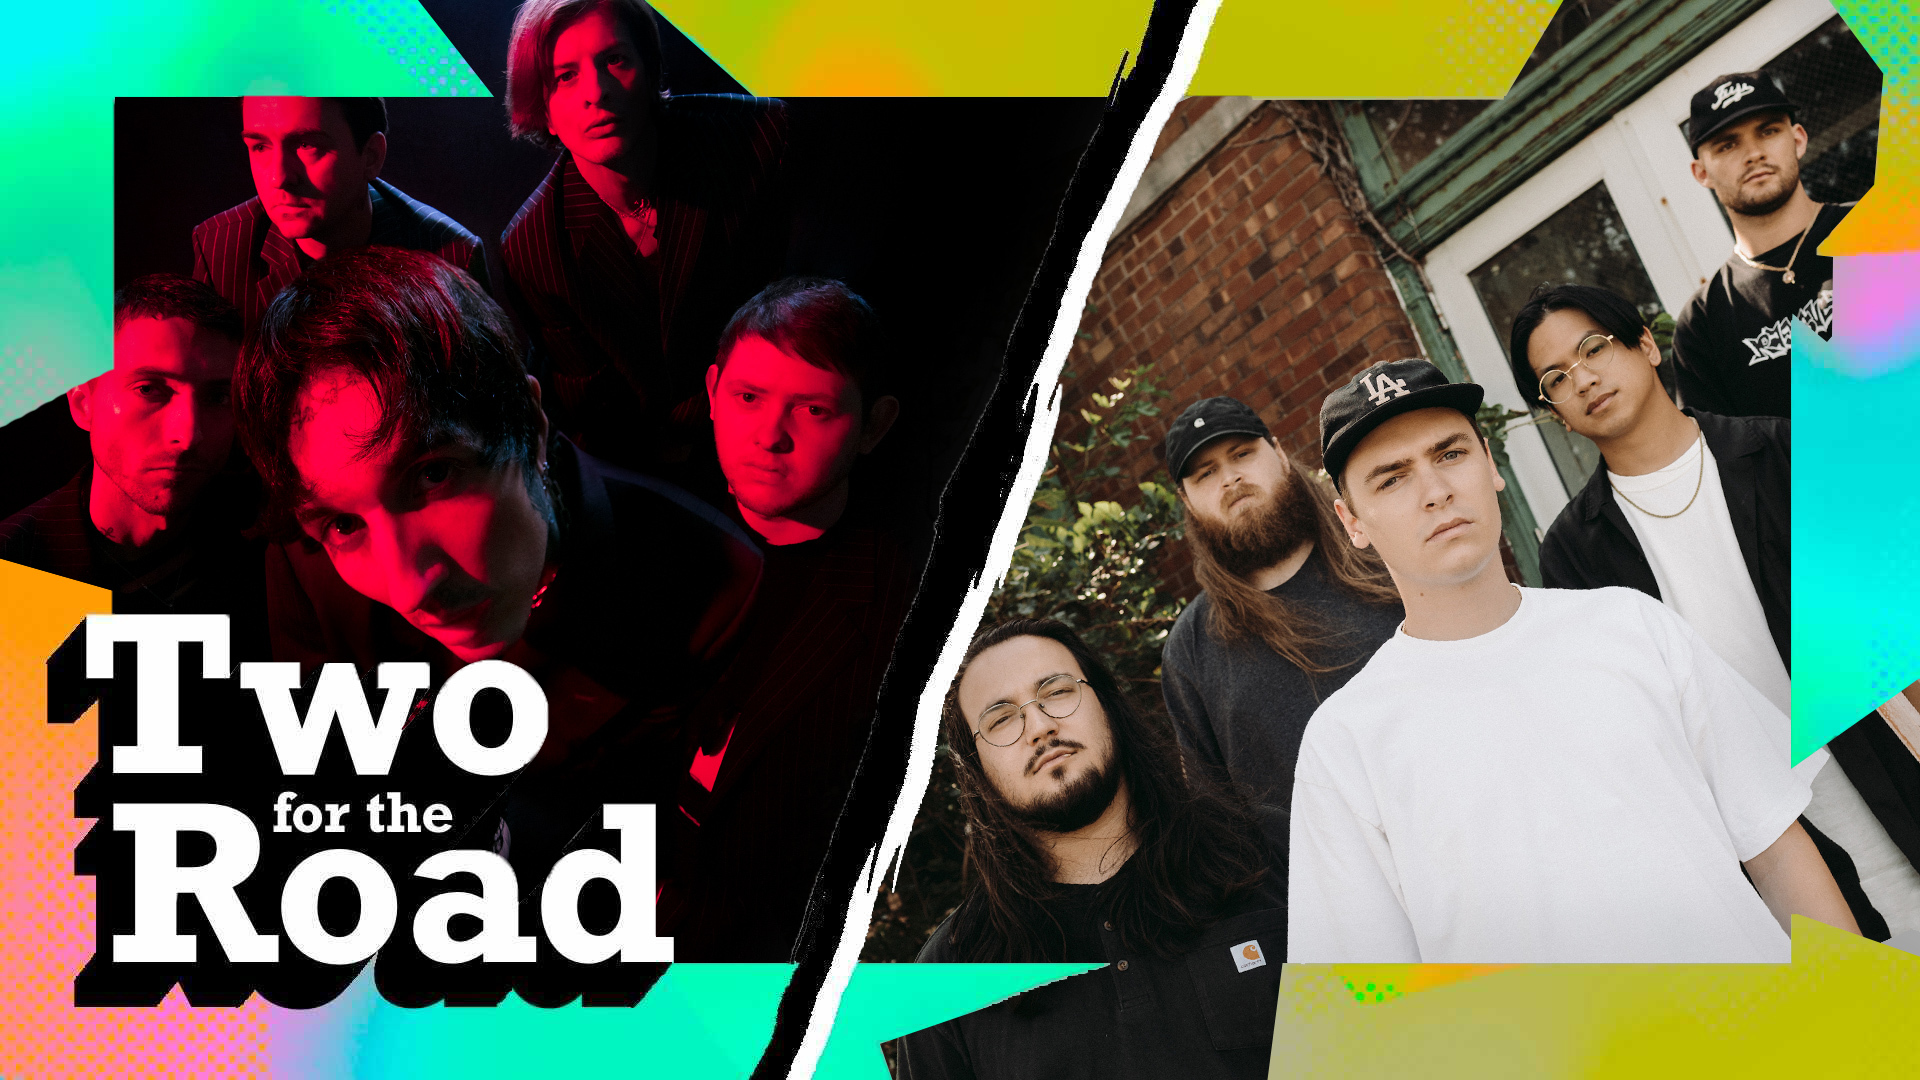 Two for the Road: Bring Me The Horizon's Oli Sykes & Knocked Loose's Bryan Garris